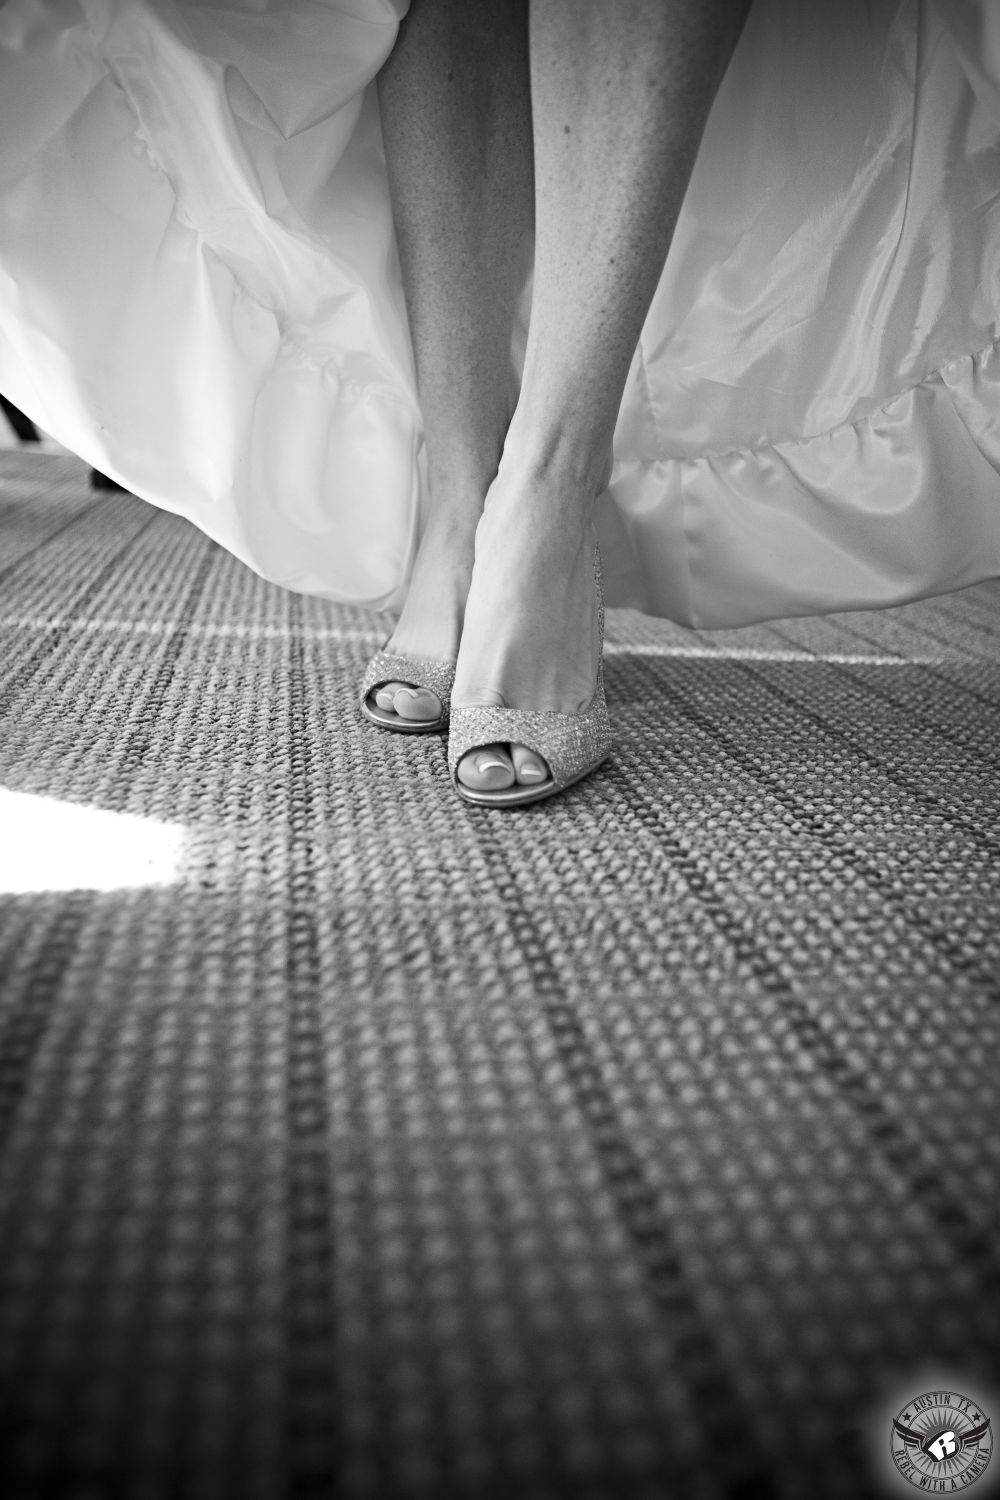 Black and white artistic detail shot of bride's shoes under her dress in the bride's room on the wedding day.